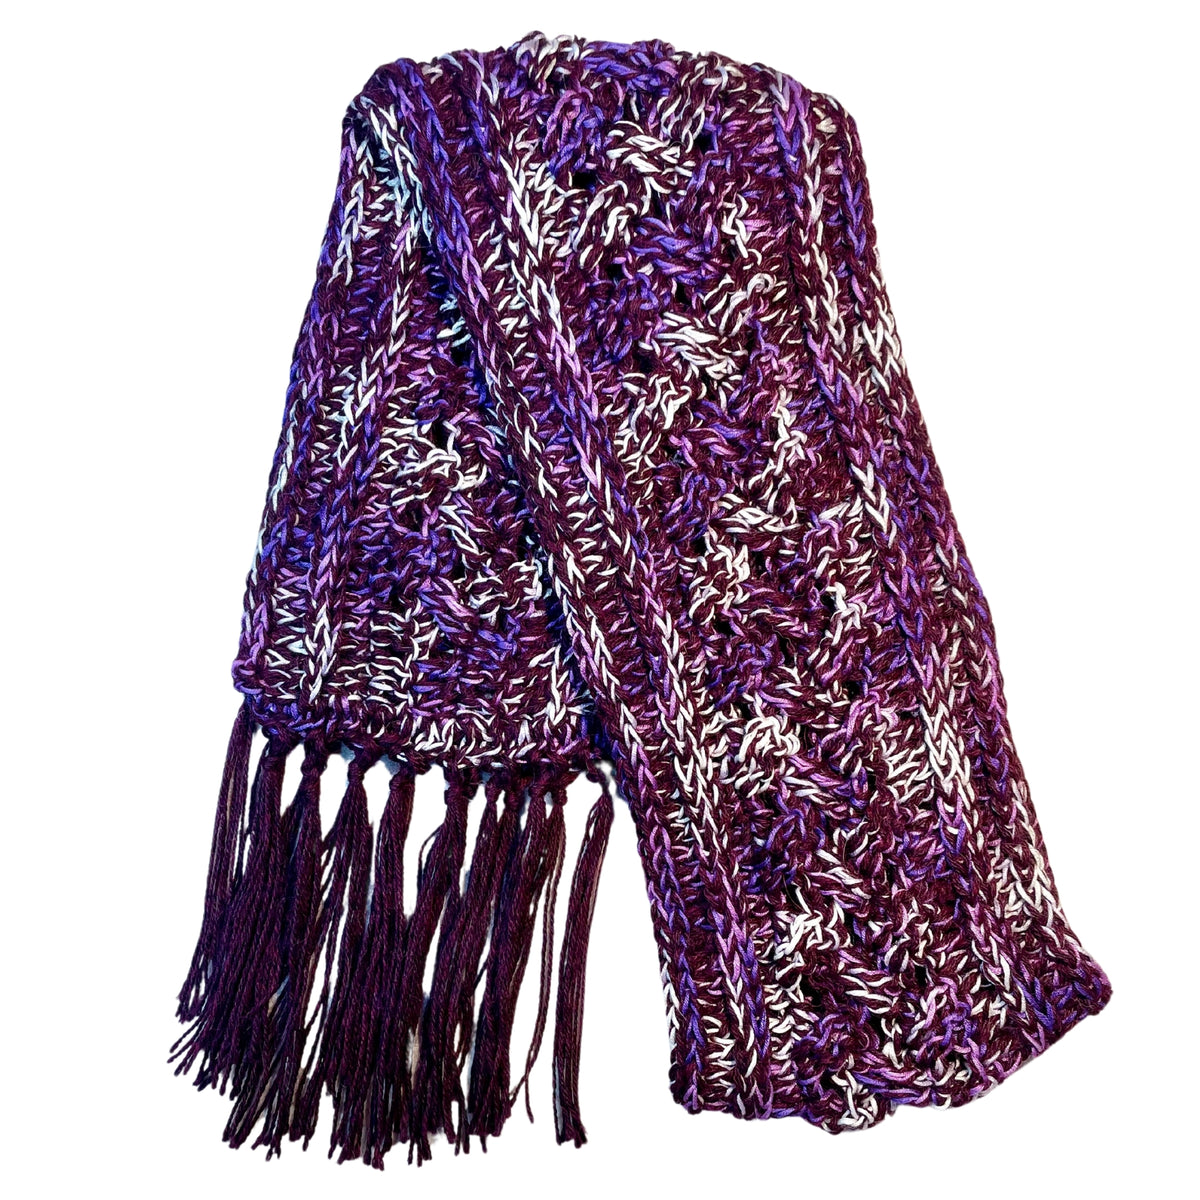 Cozy soft warm alpaca and bamboo scarf for winter fashion. Handmade knitted crochet scarf made from yarn in the colors deep purple, bright purple violet, and white. 